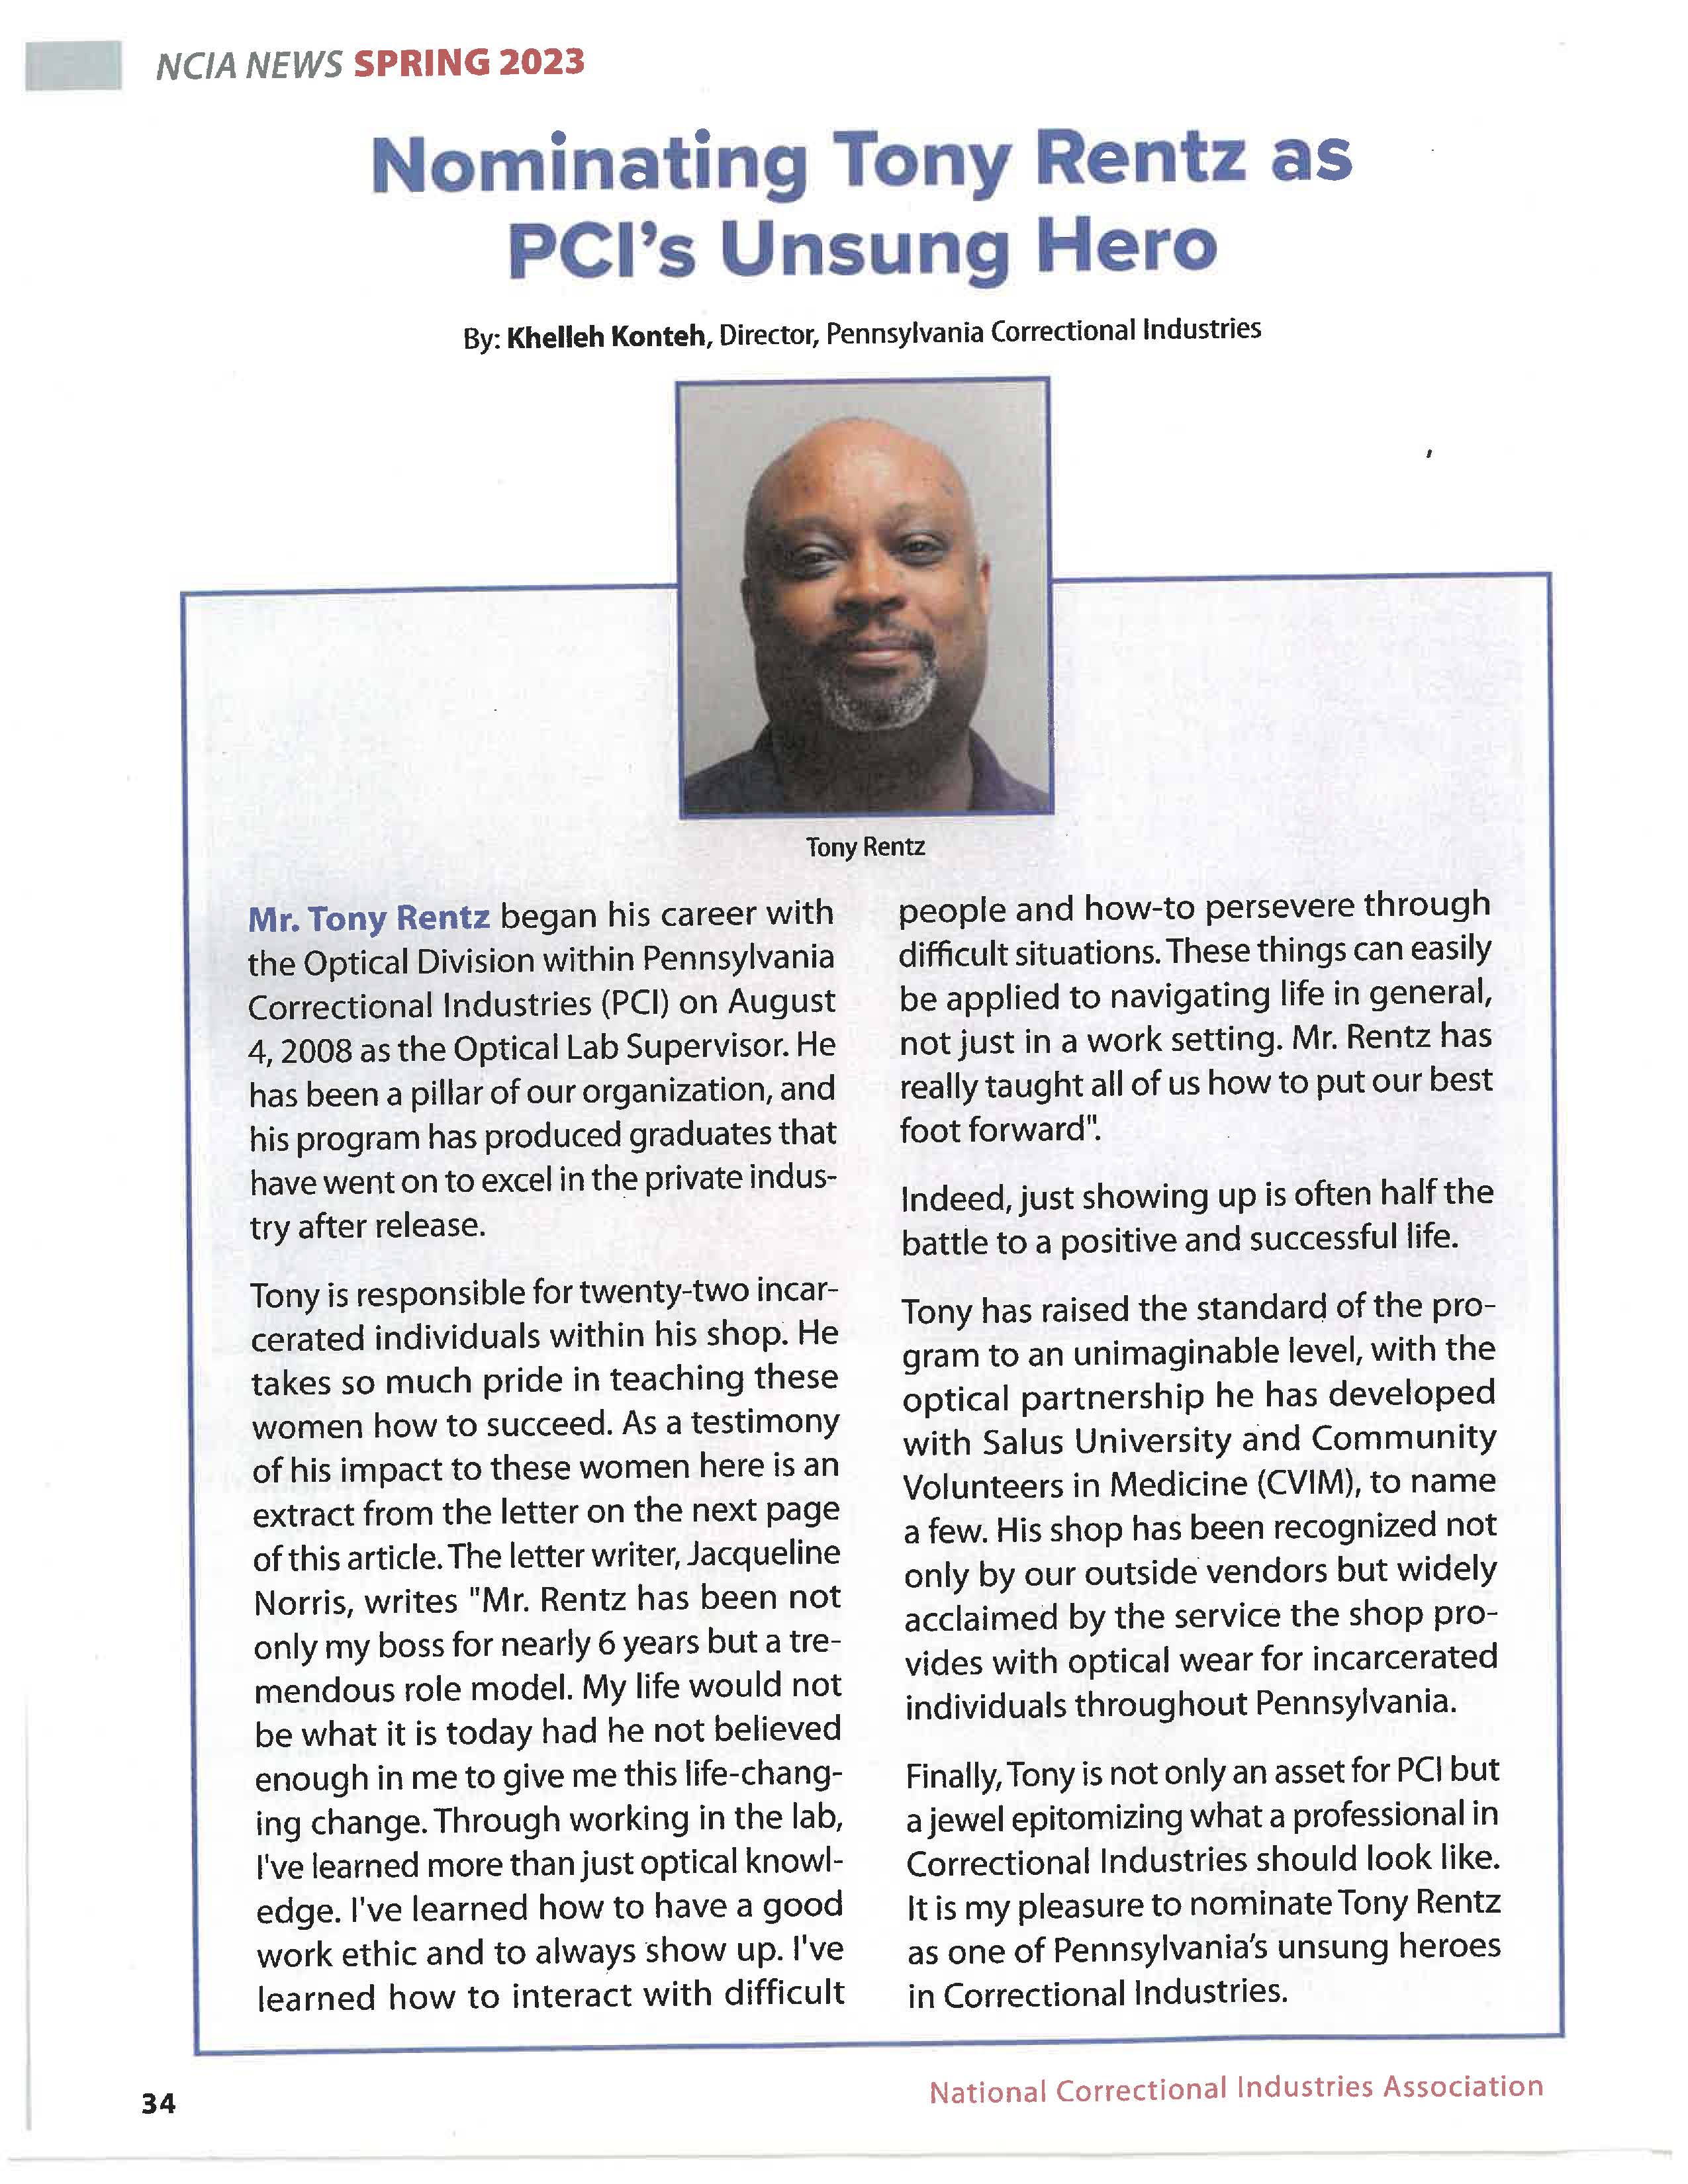 An article about SCI Cambridge Springs Optical Supervisor Tony Rentz in the spring edition of NCIA News